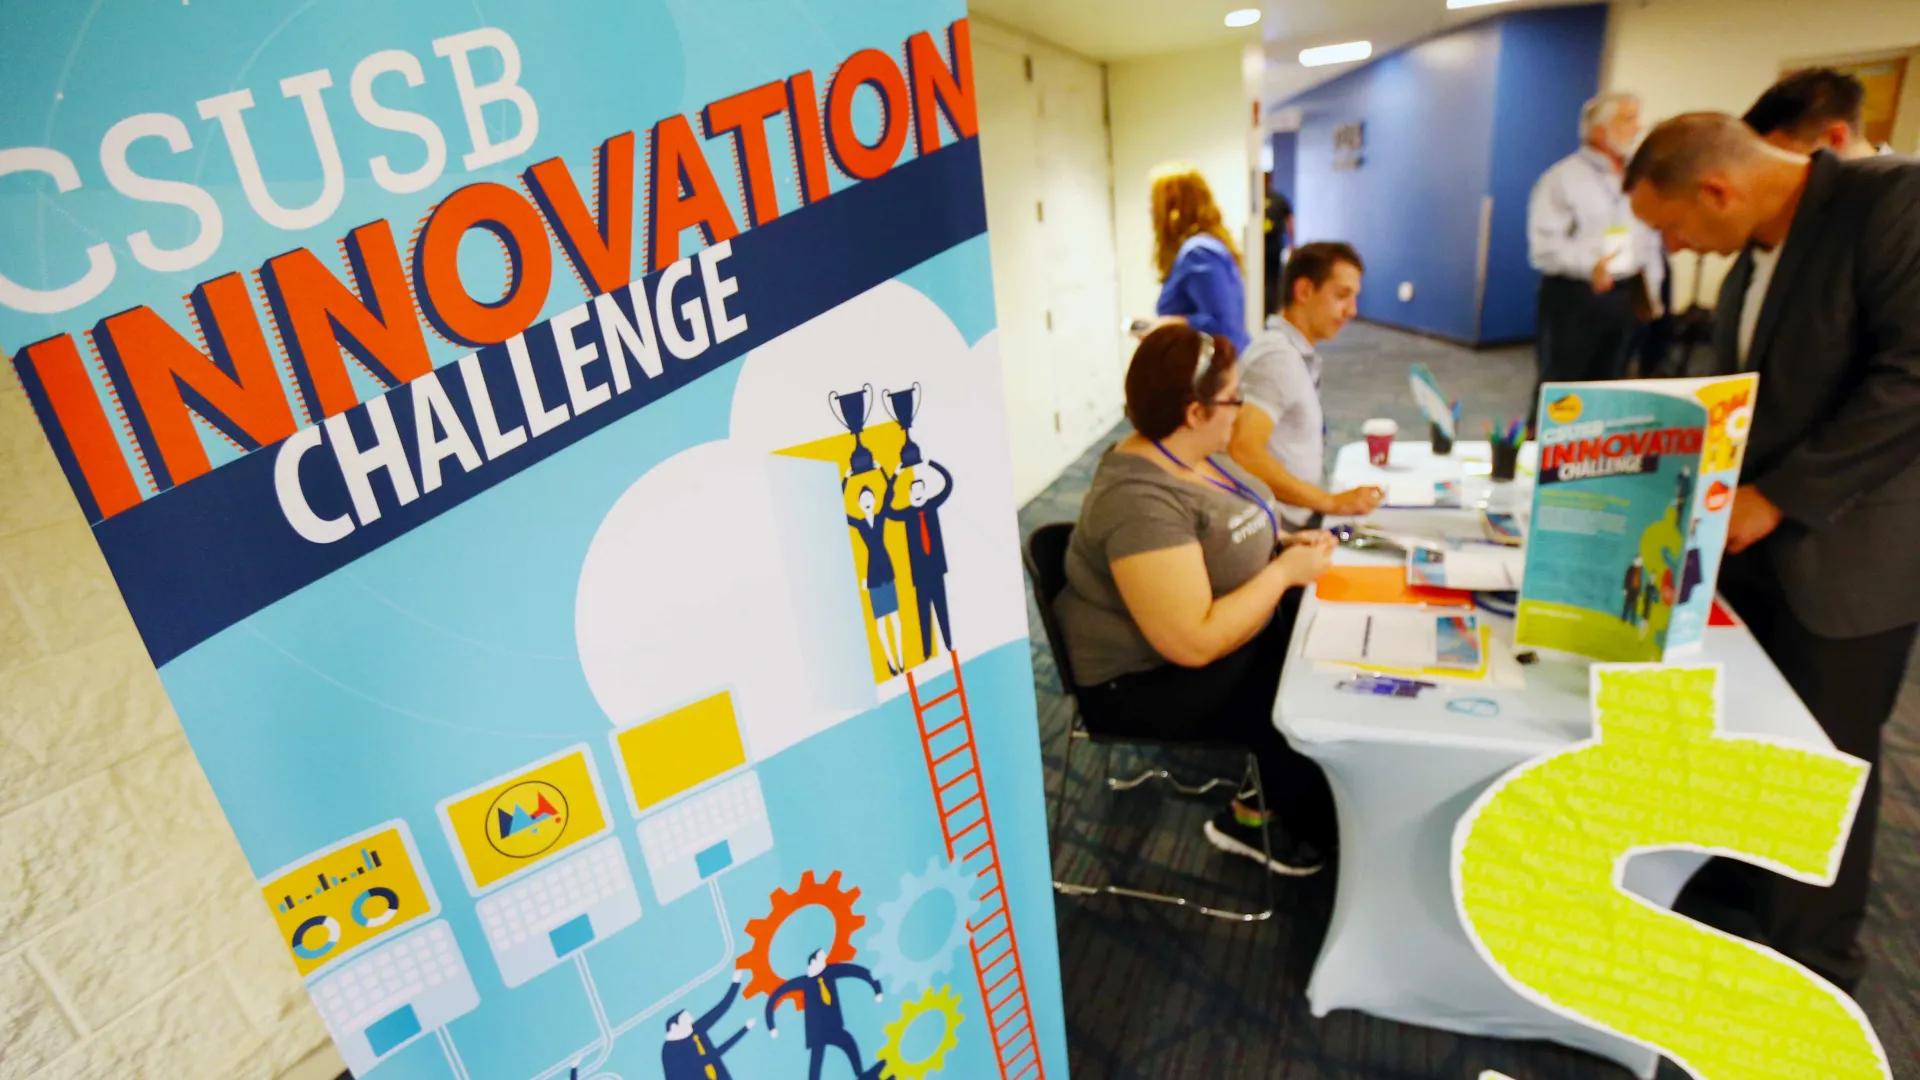 The Cal State San Bernardino virtual 2021 Innovation Challenge is accepting entries for the chance to compete for $20,000 in cash prizes.